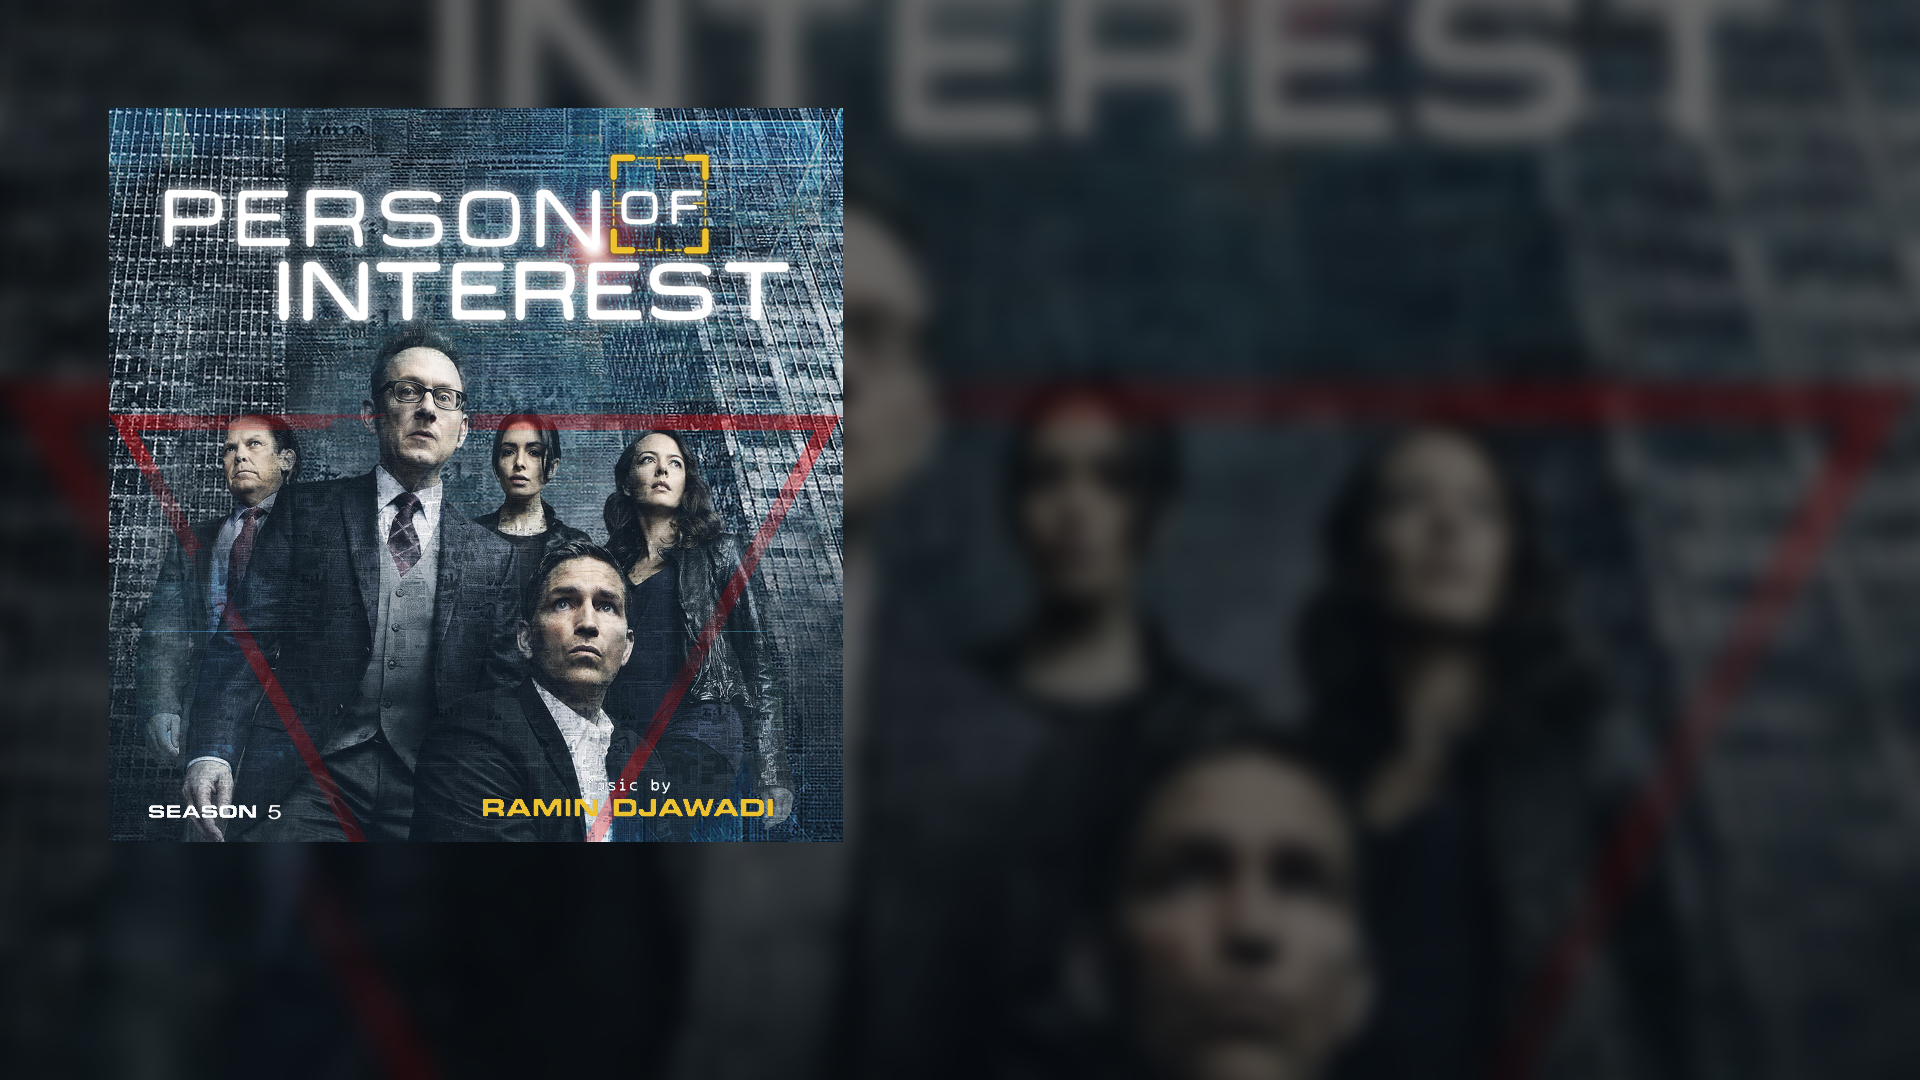 Person Of Interest - Youtube Album Cover Template , HD Wallpaper & Backgrounds